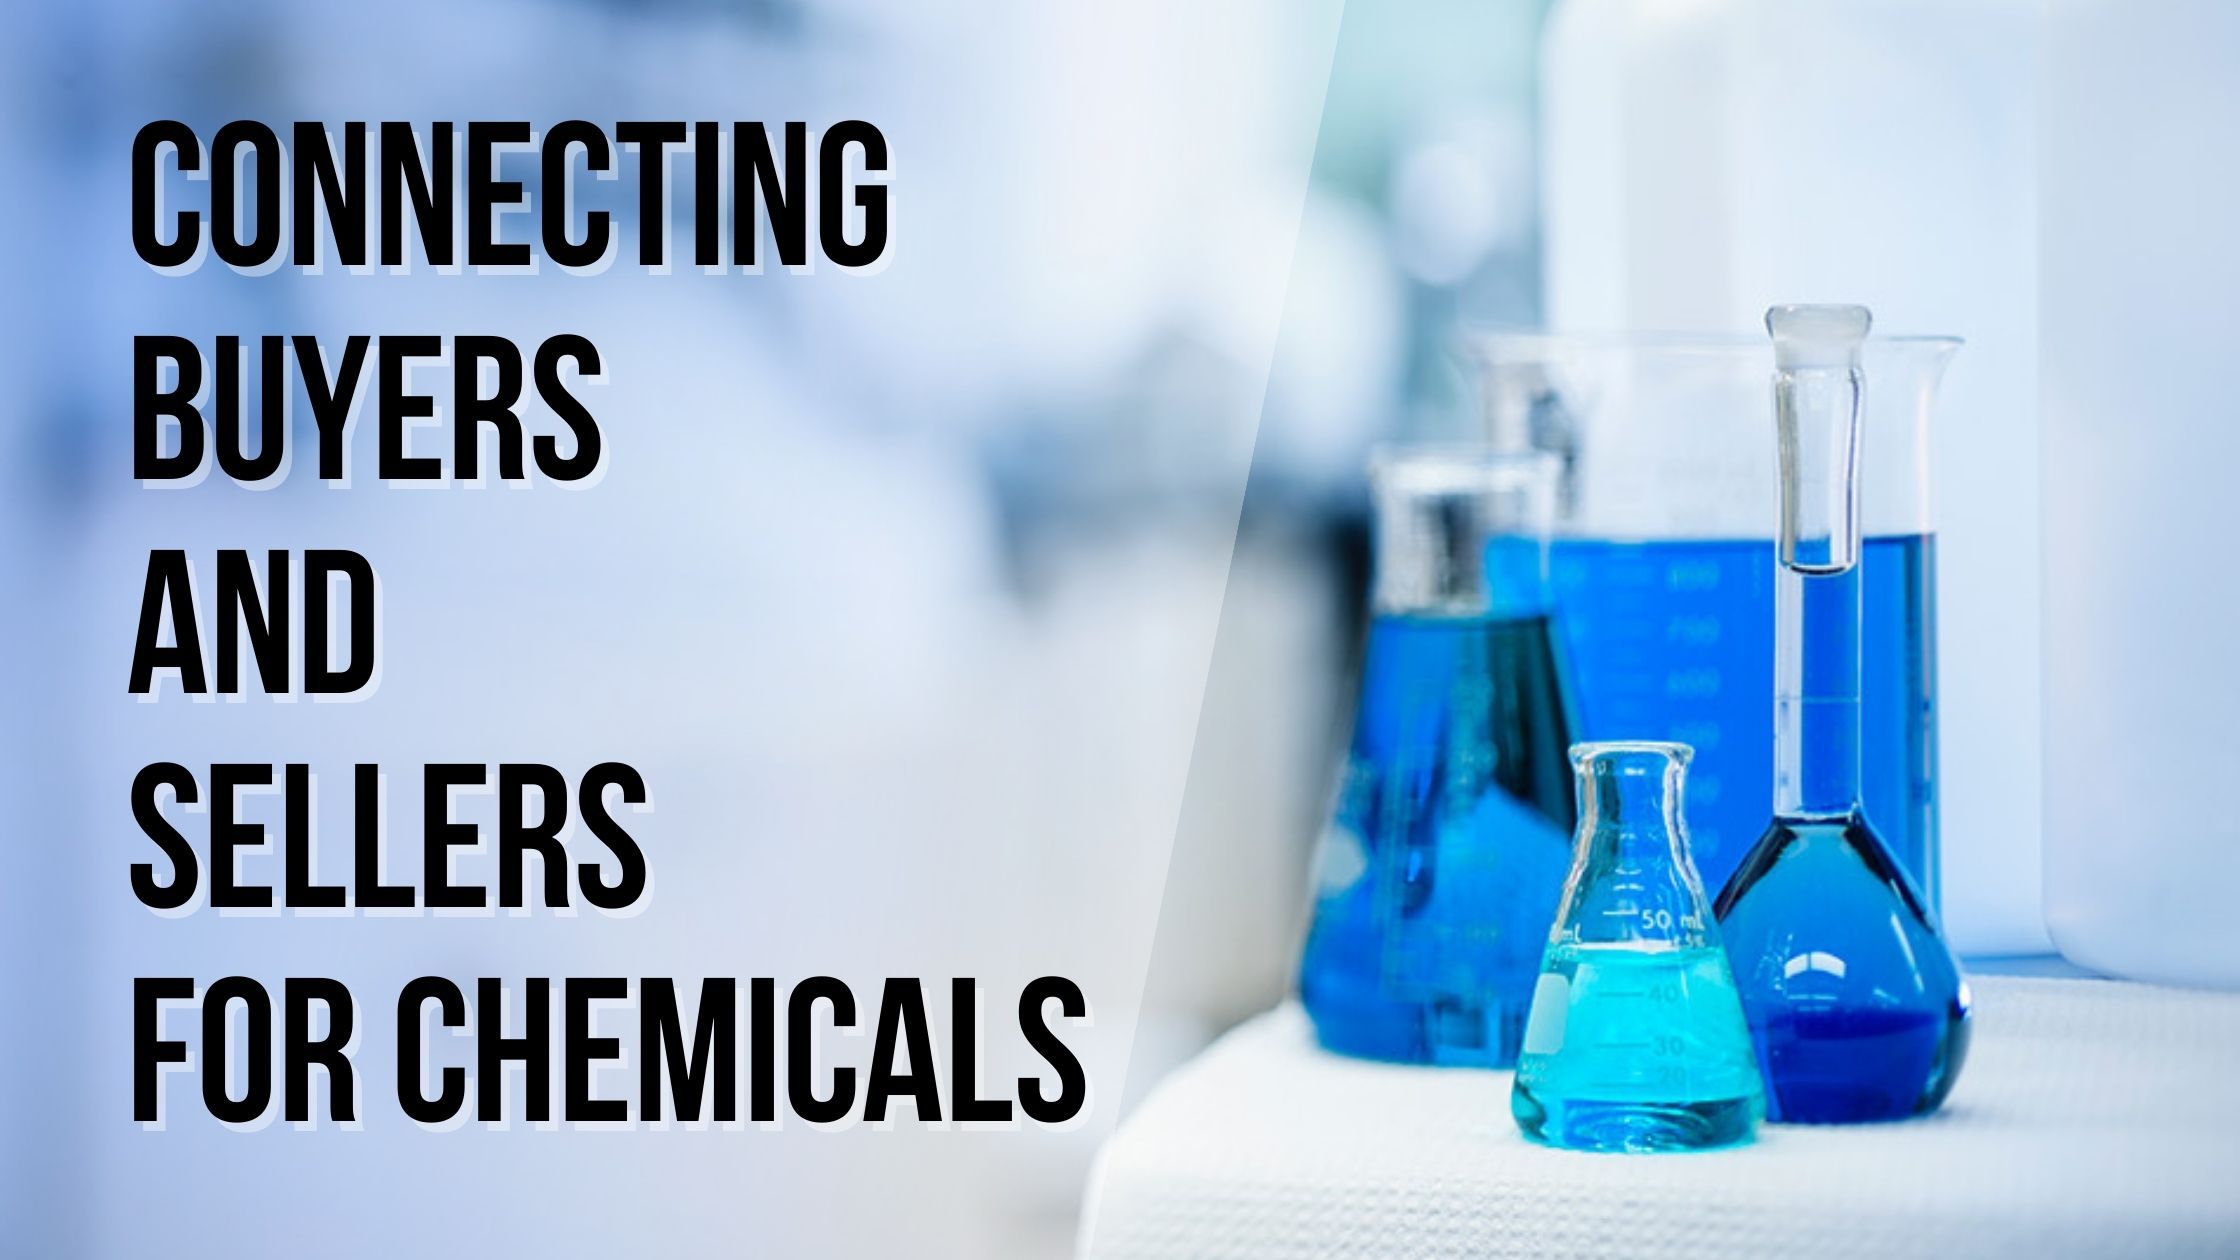 Top-Rated Platform Connecting Buyers and Sellers for Chemicals